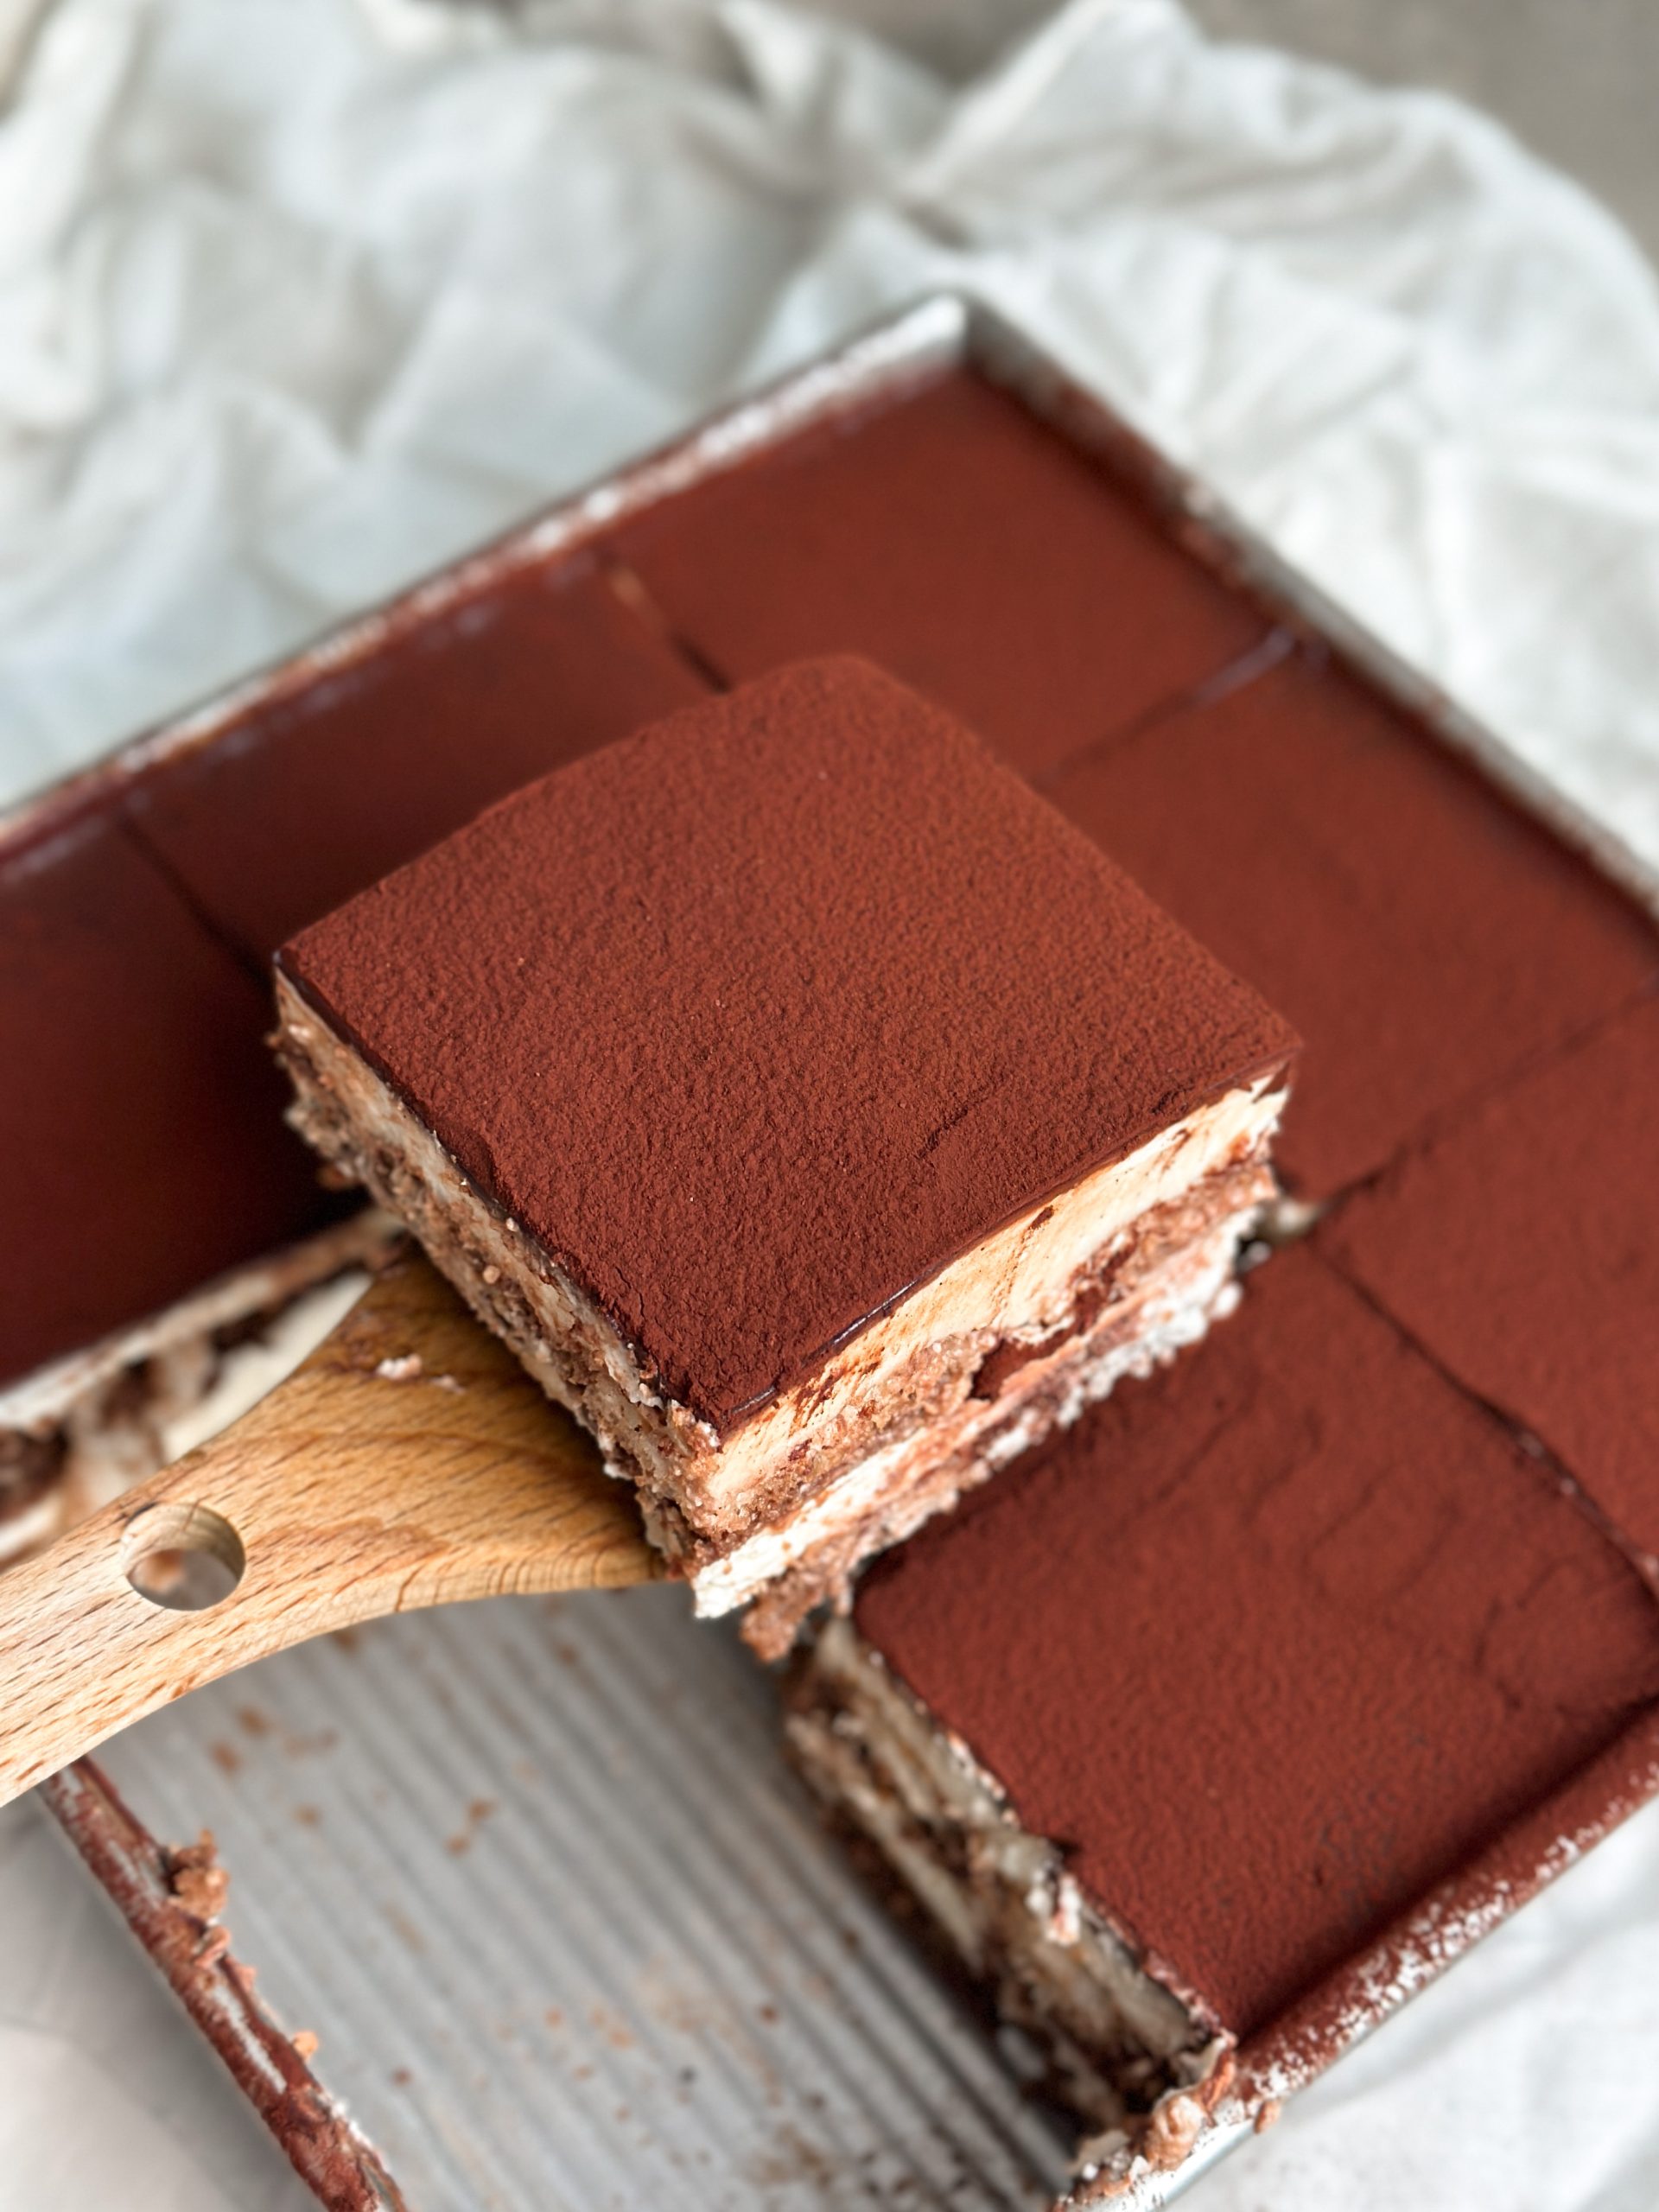 chocolate tiramisu in a 9x9" baking dish cut into slices, spatula pulling out one slice revealing soft layers of cream, ganache and ladyfingers